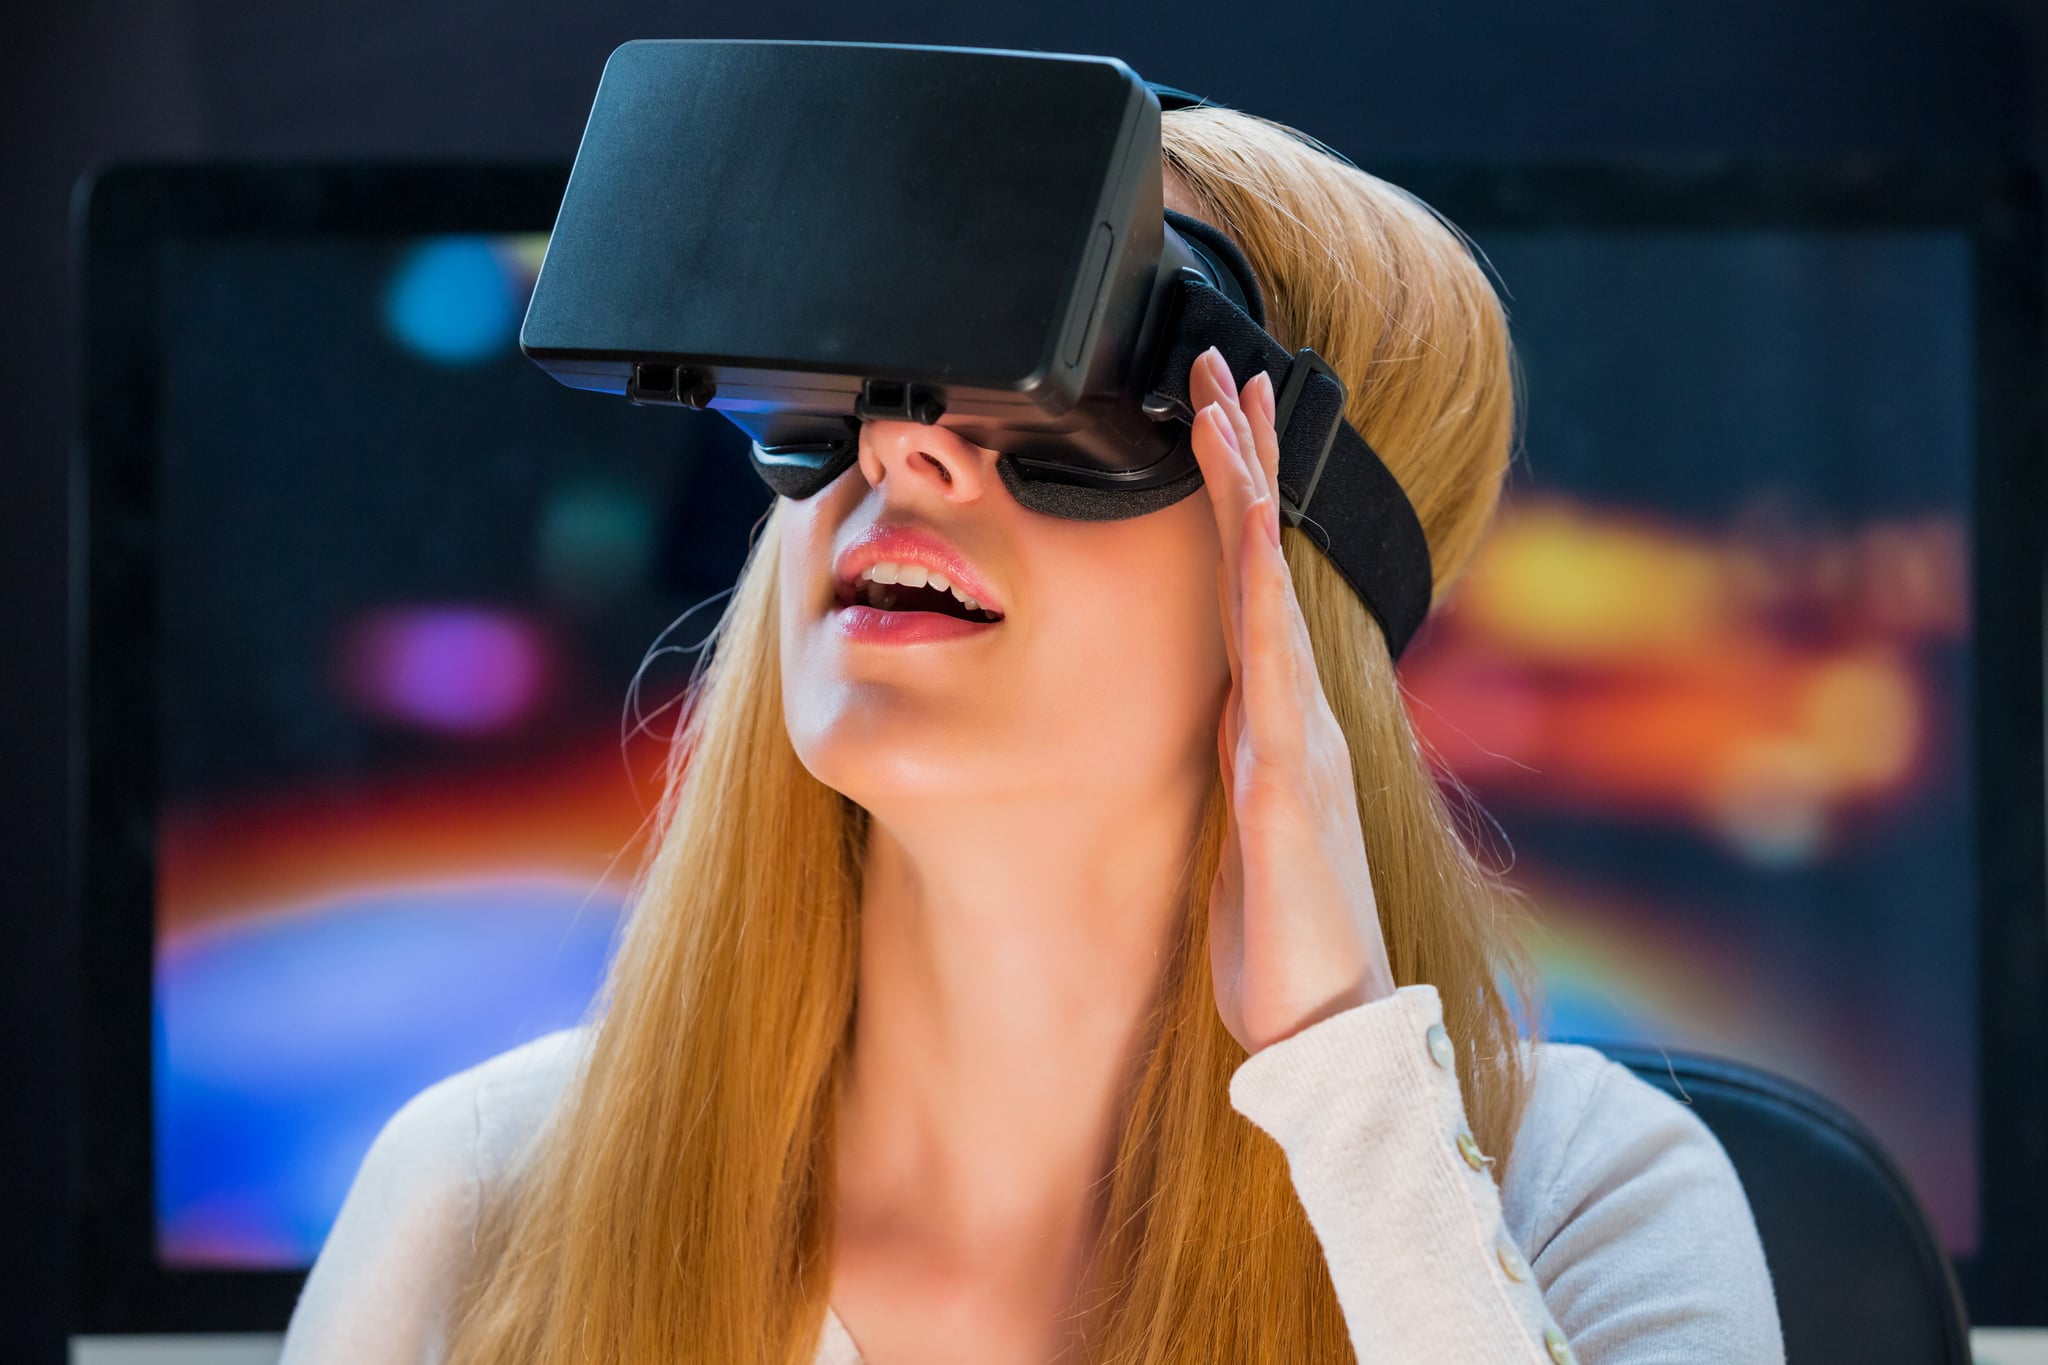 How Much Does the Oculus Rift Cost? | Tech